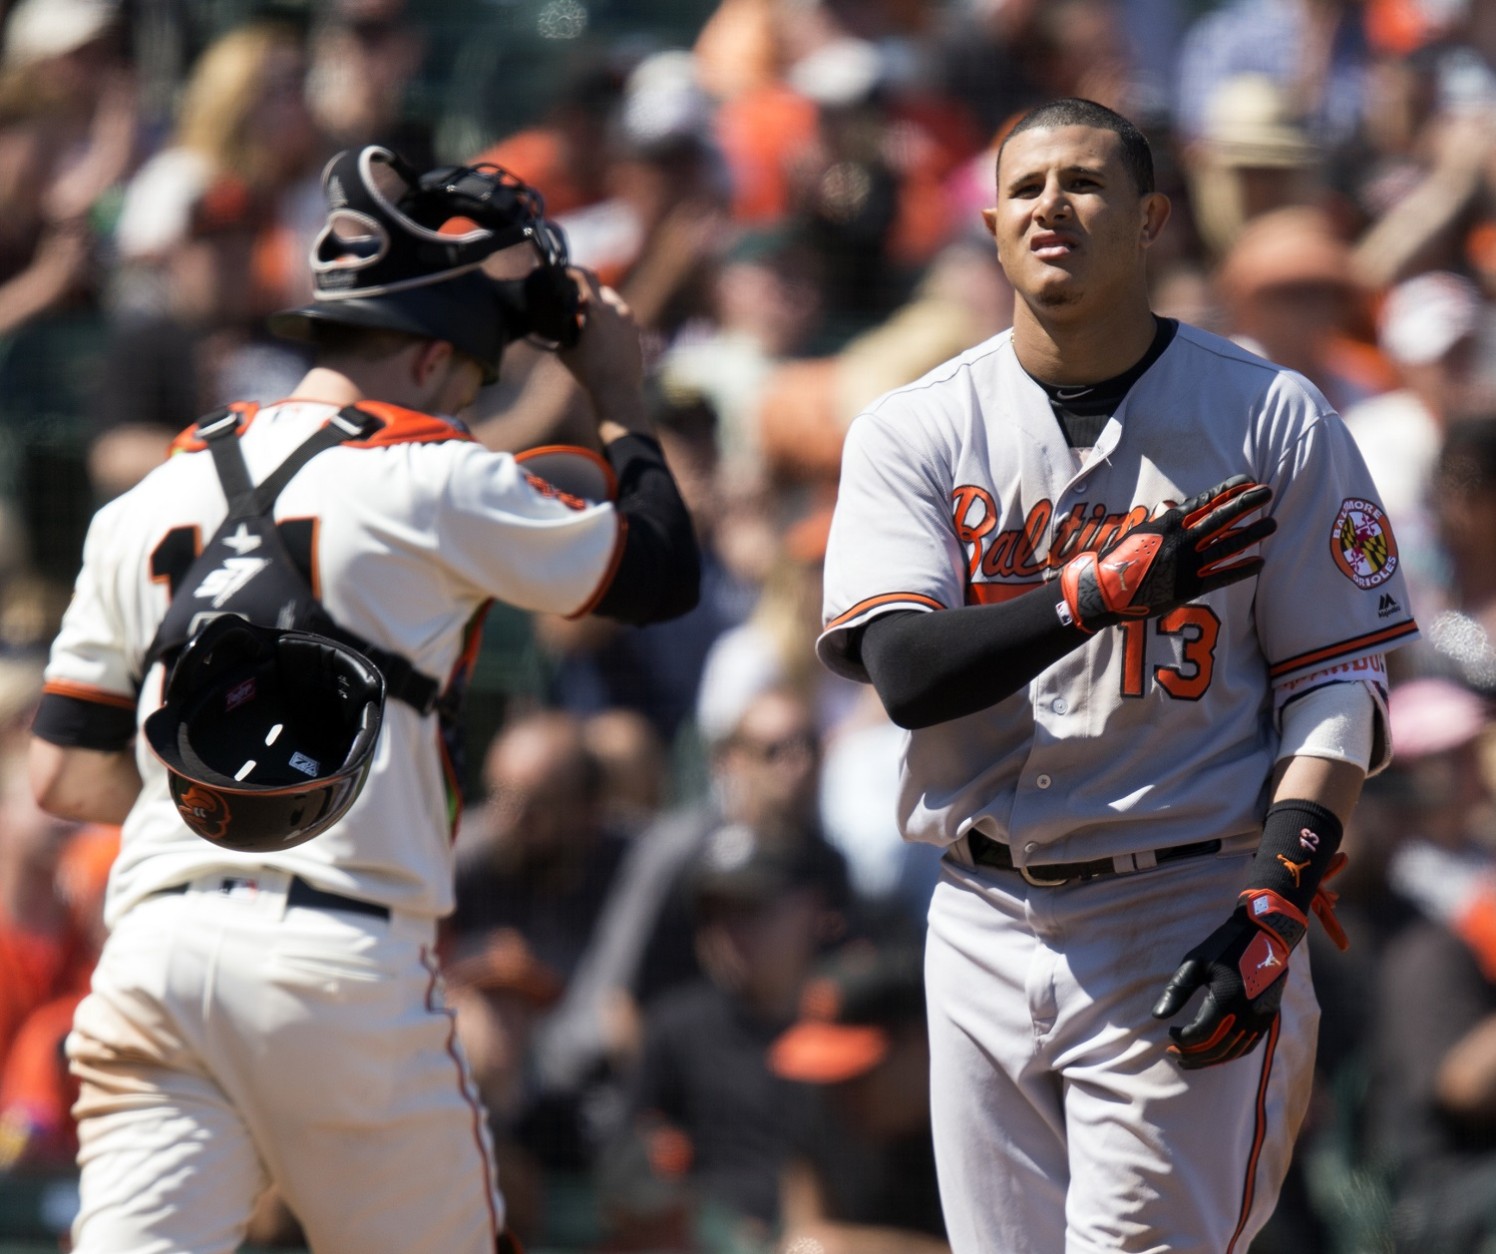 Baltimore Orioles' Manny Machado (13) tosses his helmet after striking out against the San Francisco Giants during the seventh inning of a baseball game, Sunday, Aug. 14, 2016, in San Francisco. The Orioles won 8-7. (AP Photo/D. Ross Cameron)